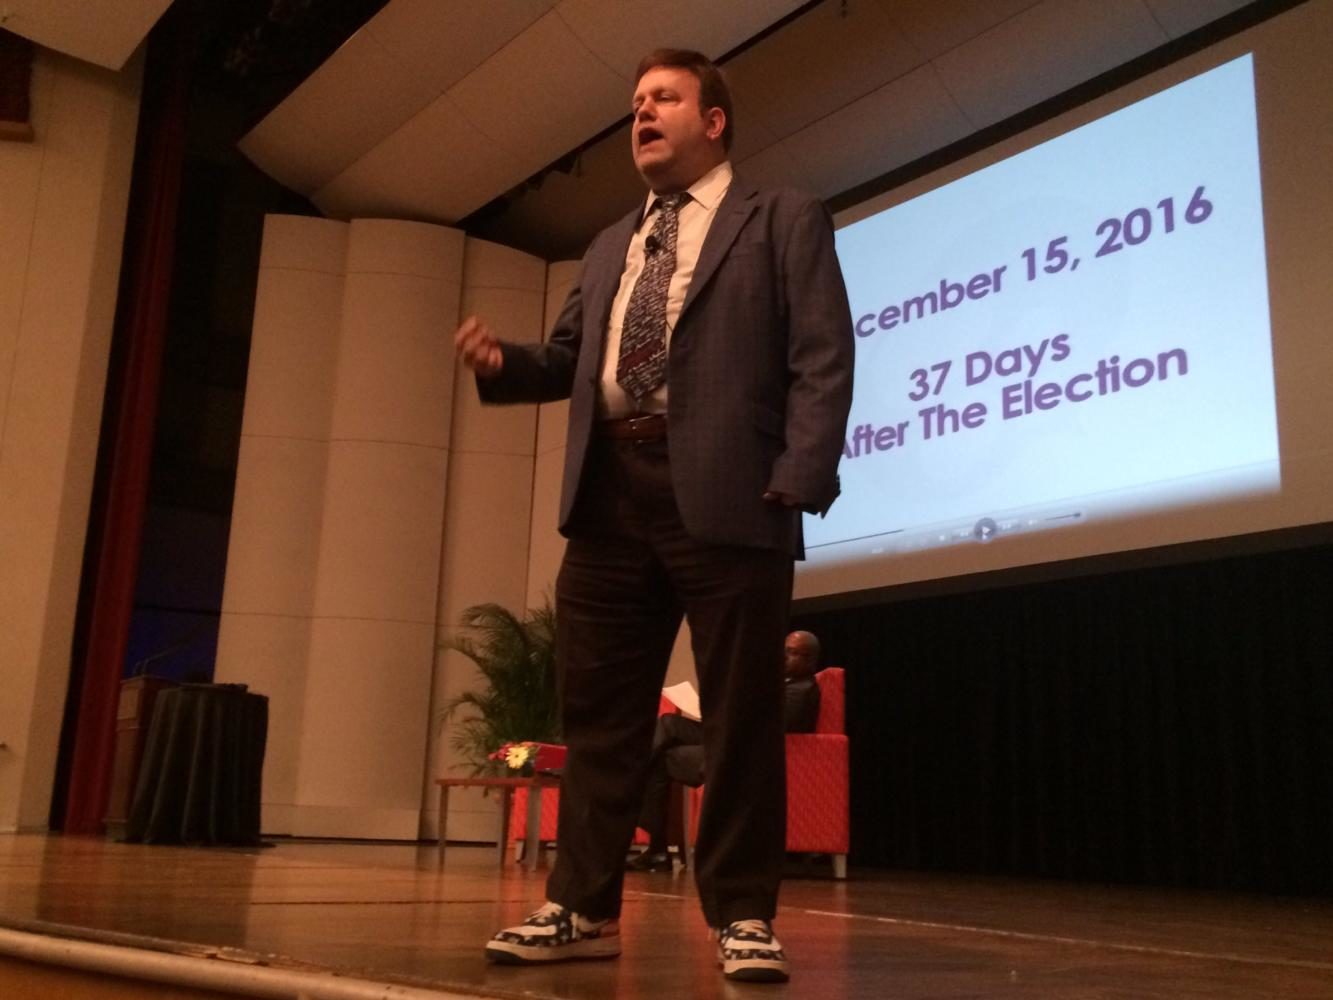 Frank Luntz speaks at the Ed Renwick Lecture Series in Roussel Hall on April 27. Luntz claimed anger as the defining mood of the American electorate. Photo credit: Nick Reimann